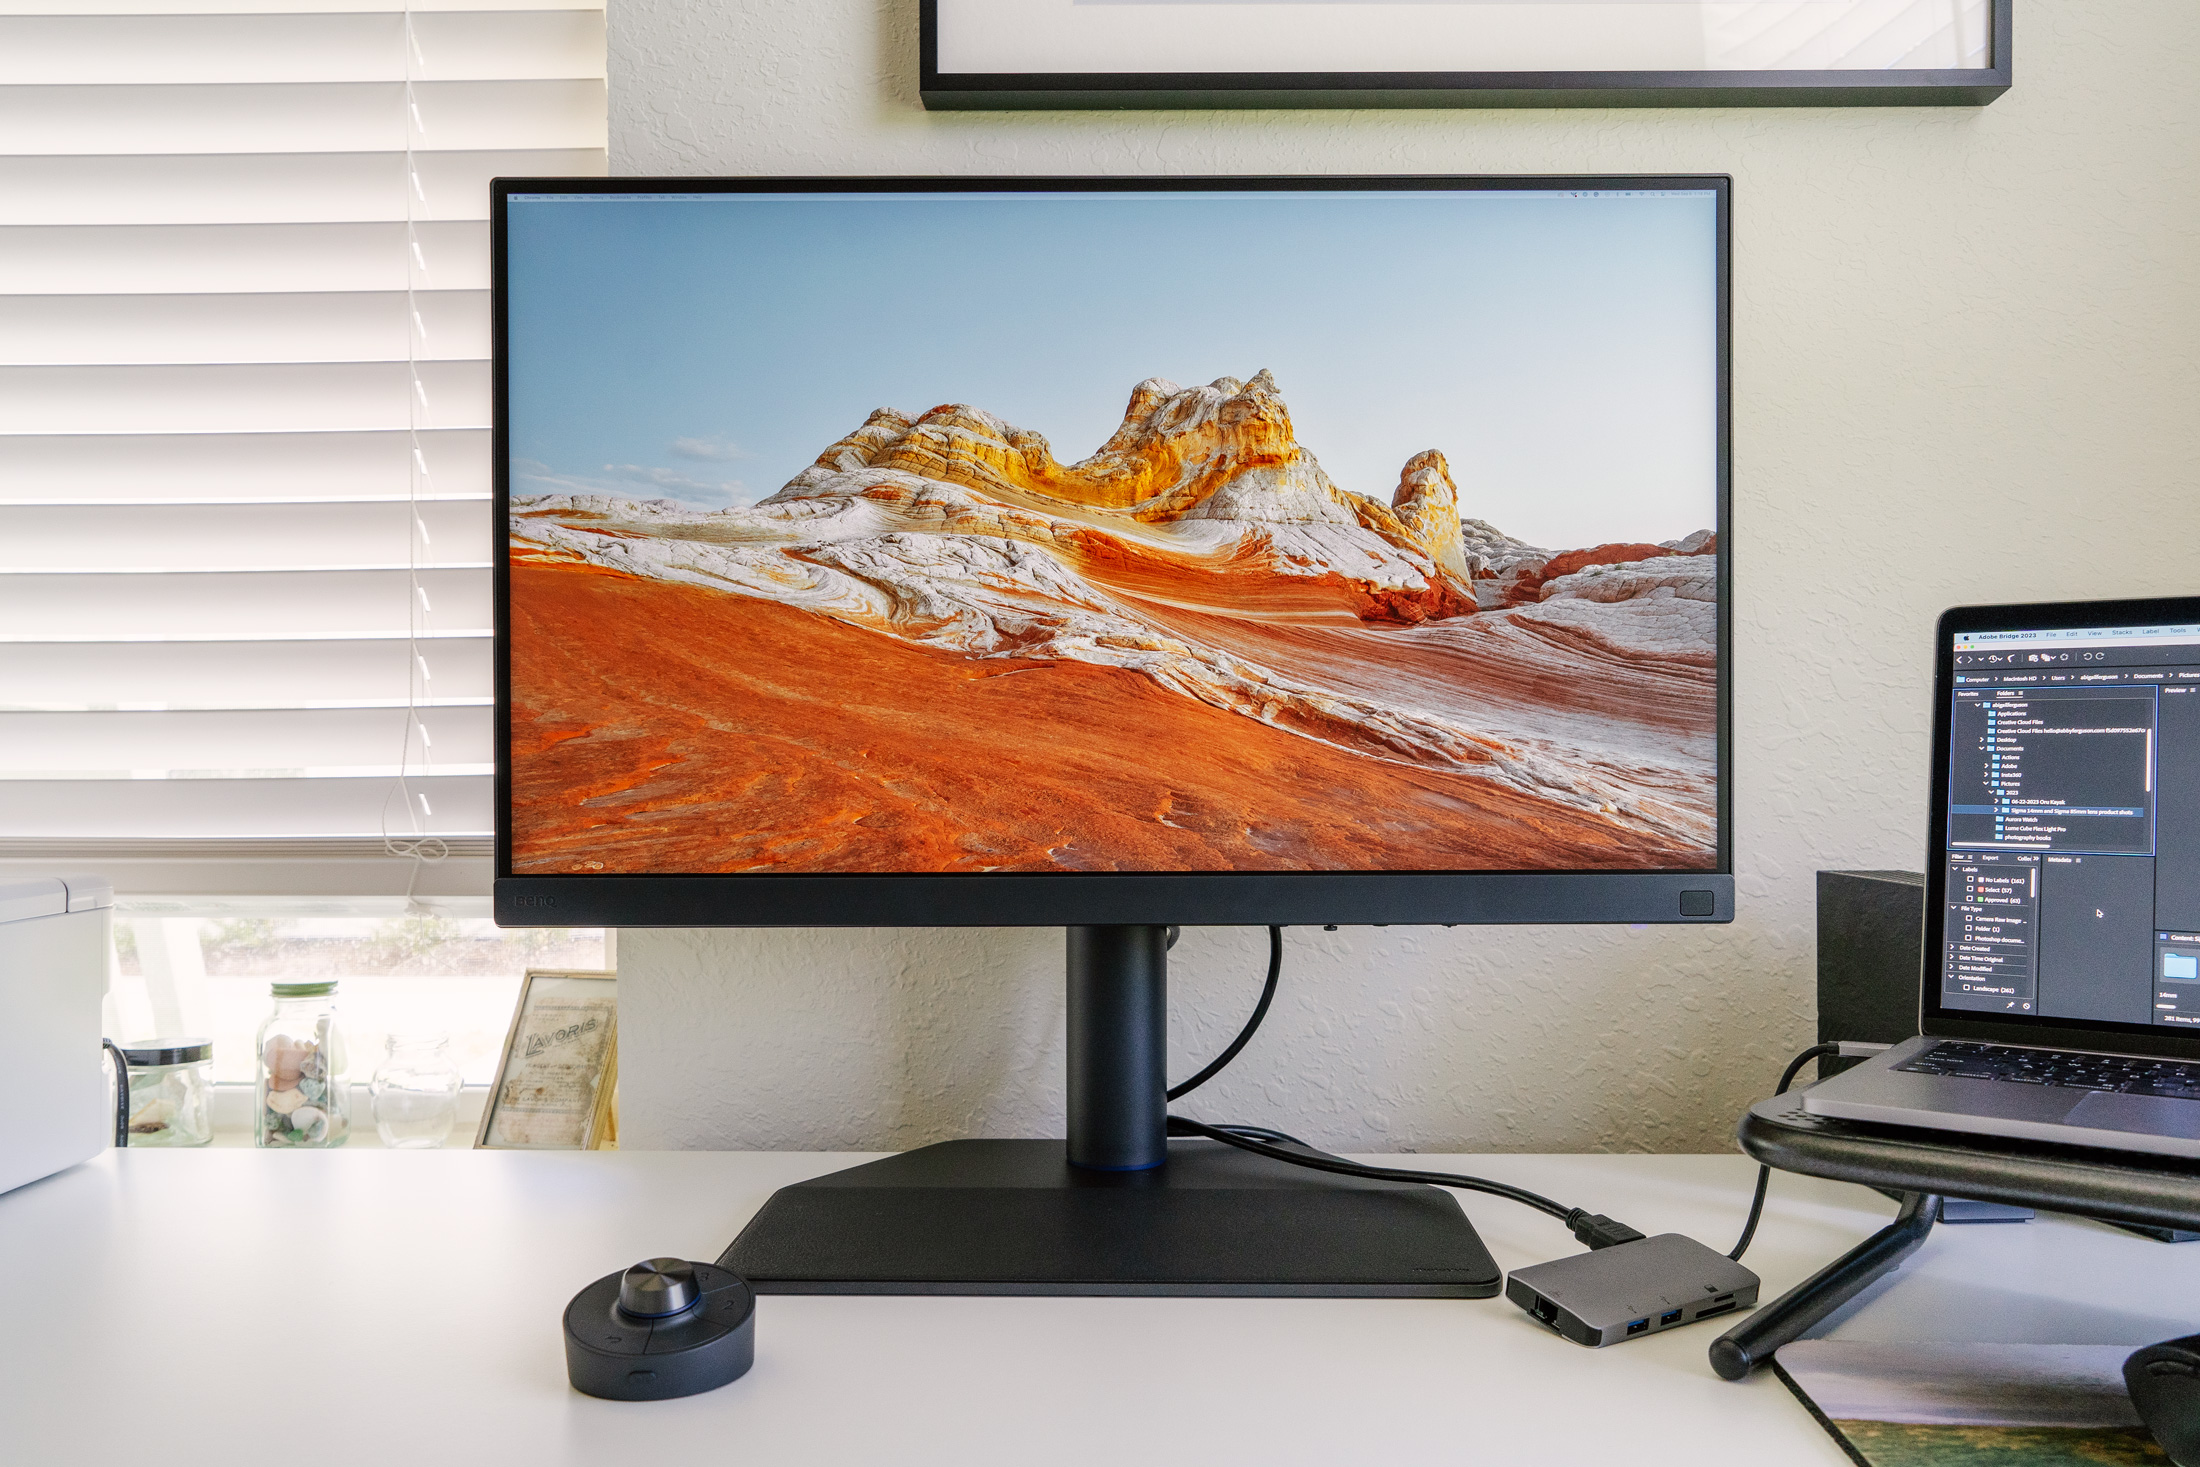 A BenQ SW272U monitor sits on a white desk with the Hotkey Puck and laptop stand next to it.